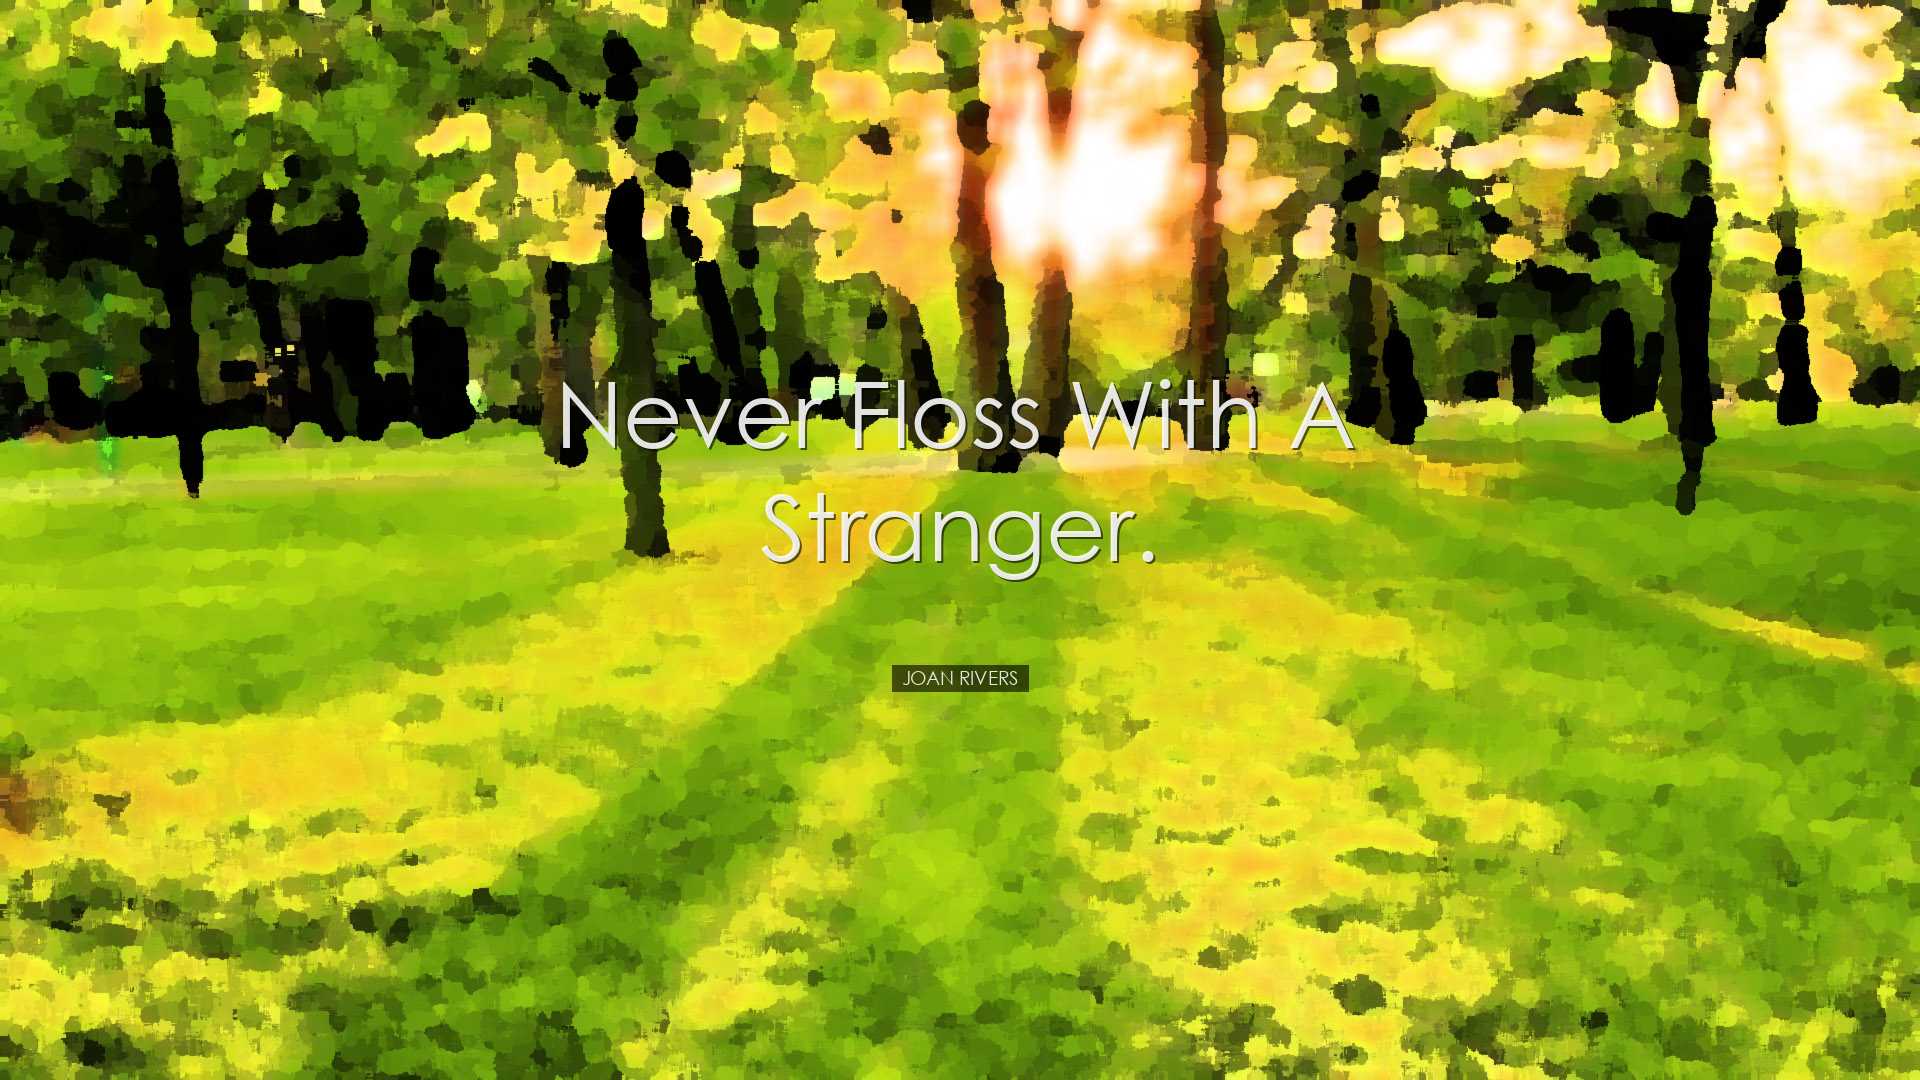 Never floss with a stranger. - Joan Rivers